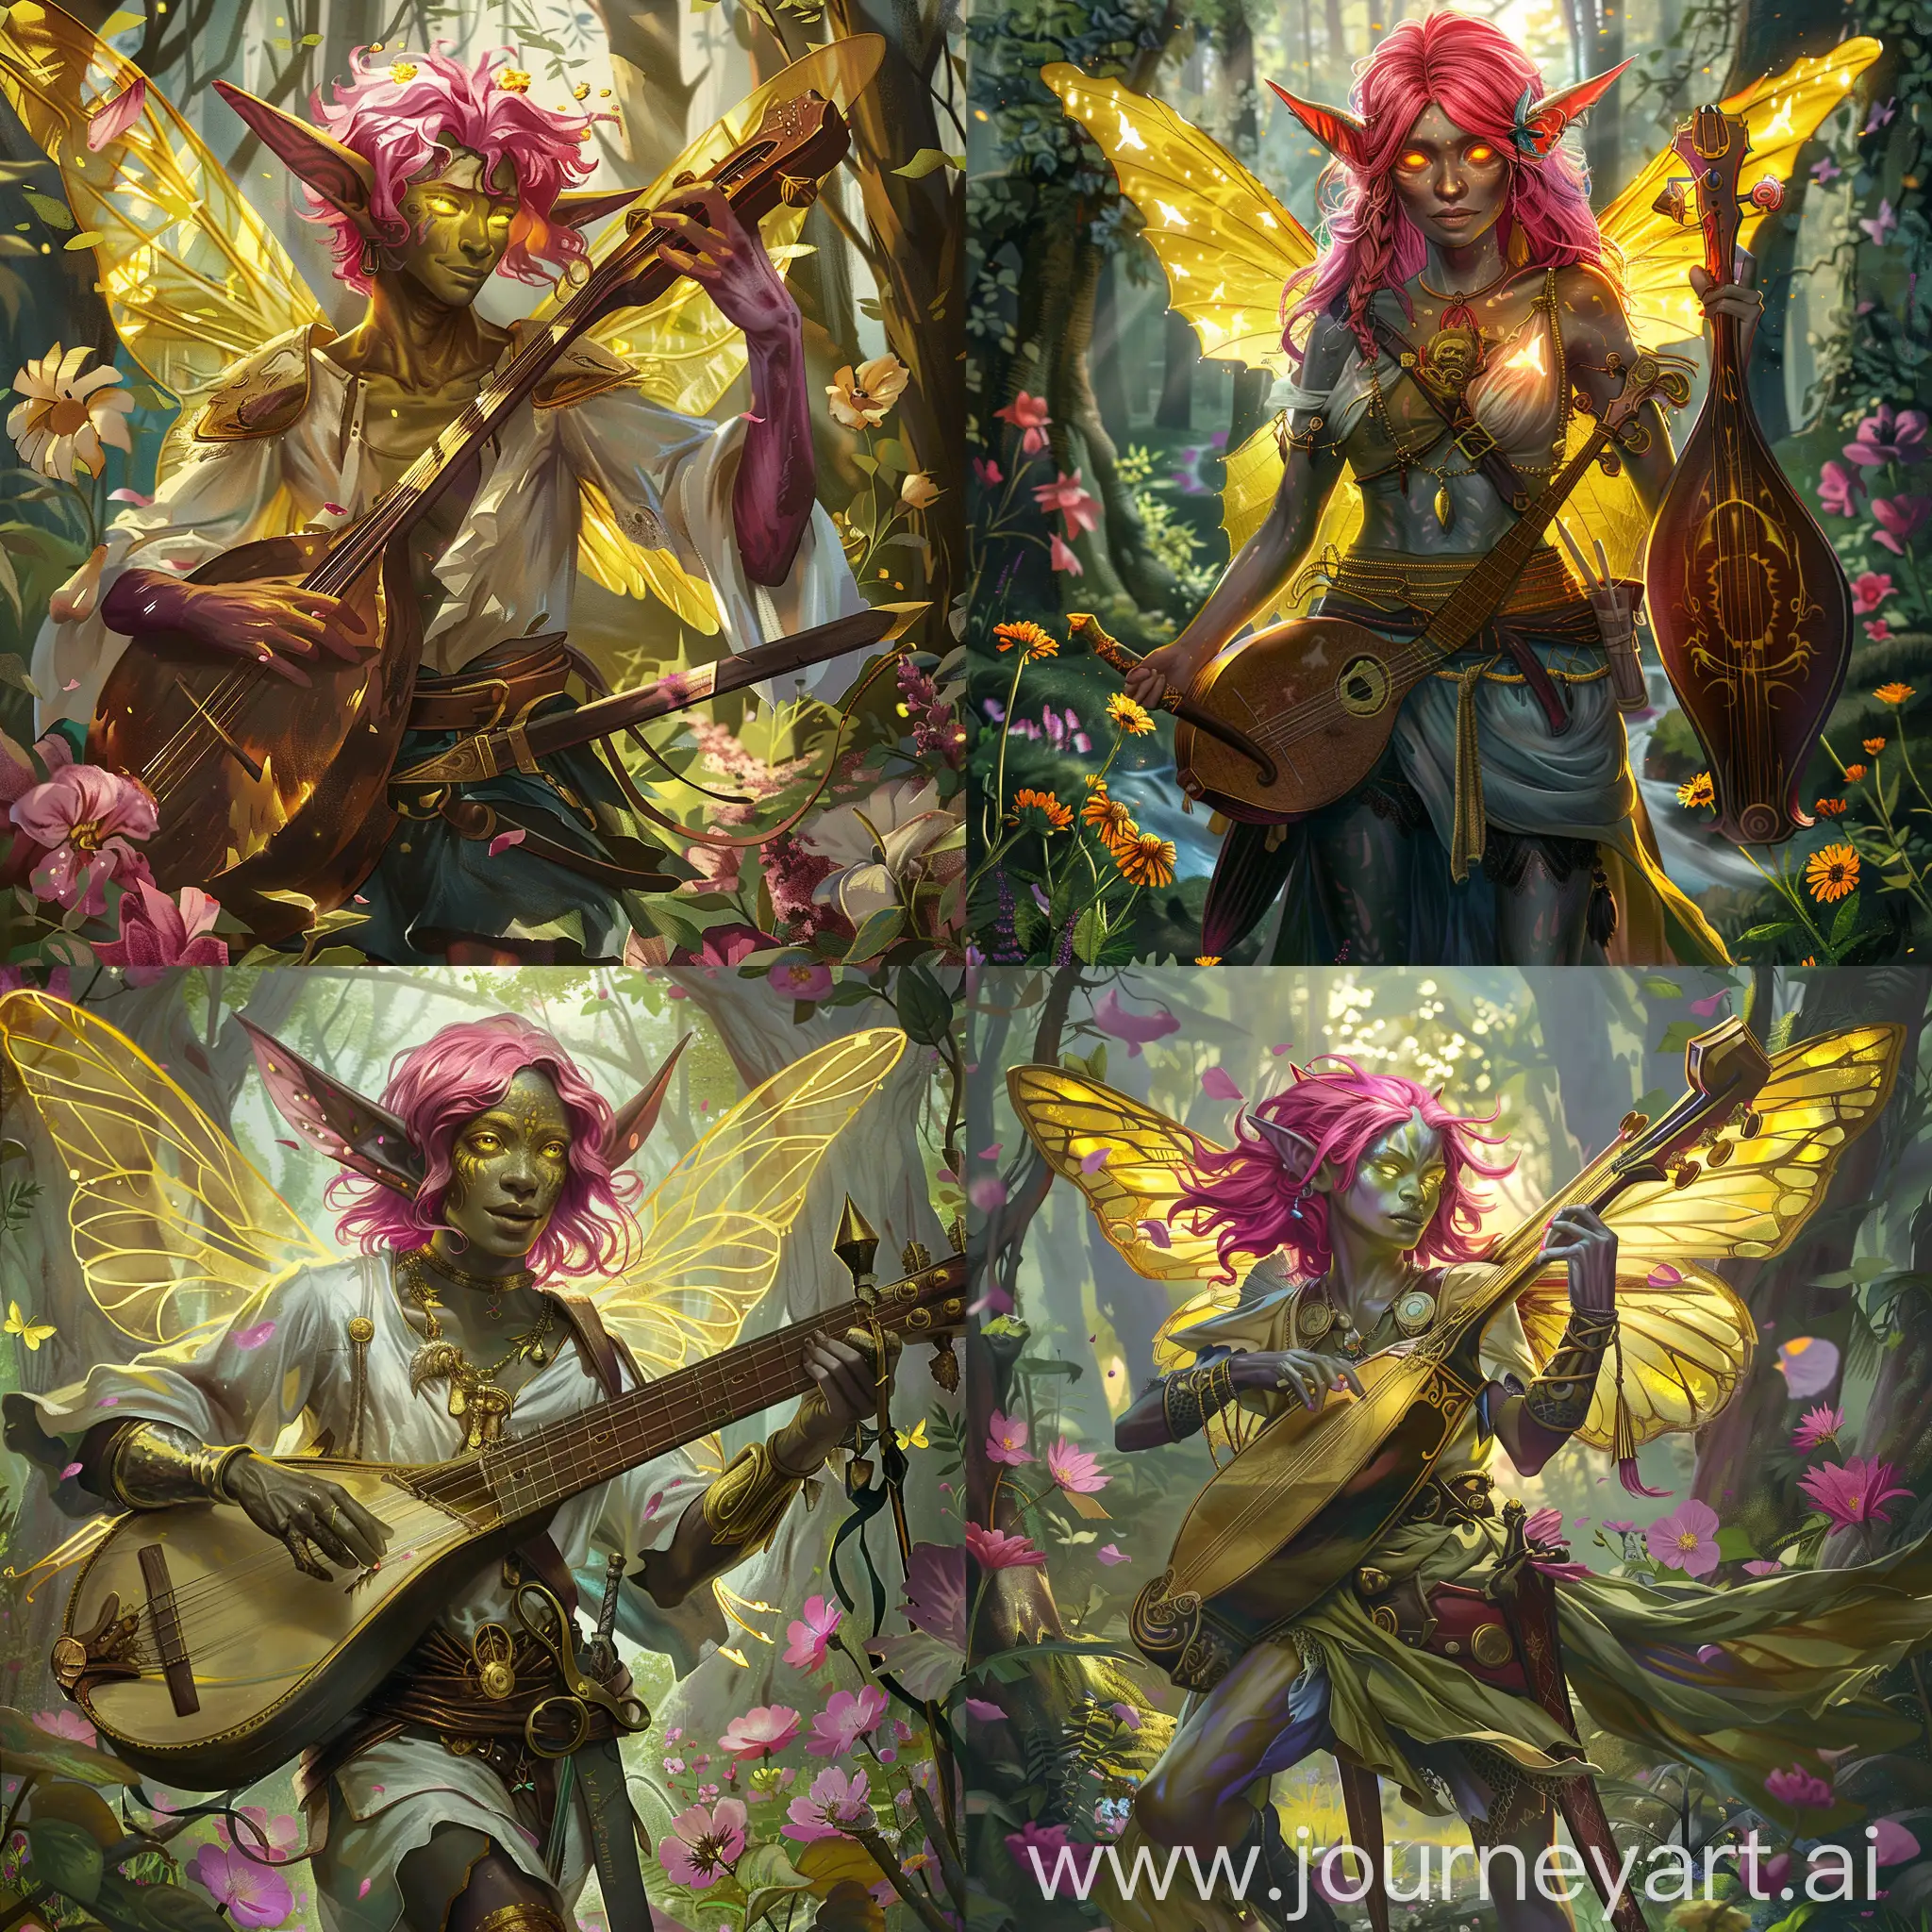 Fairy-with-Pink-Hair-and-Golden-Wings-Playing-Lyre-in-Forest-Setting